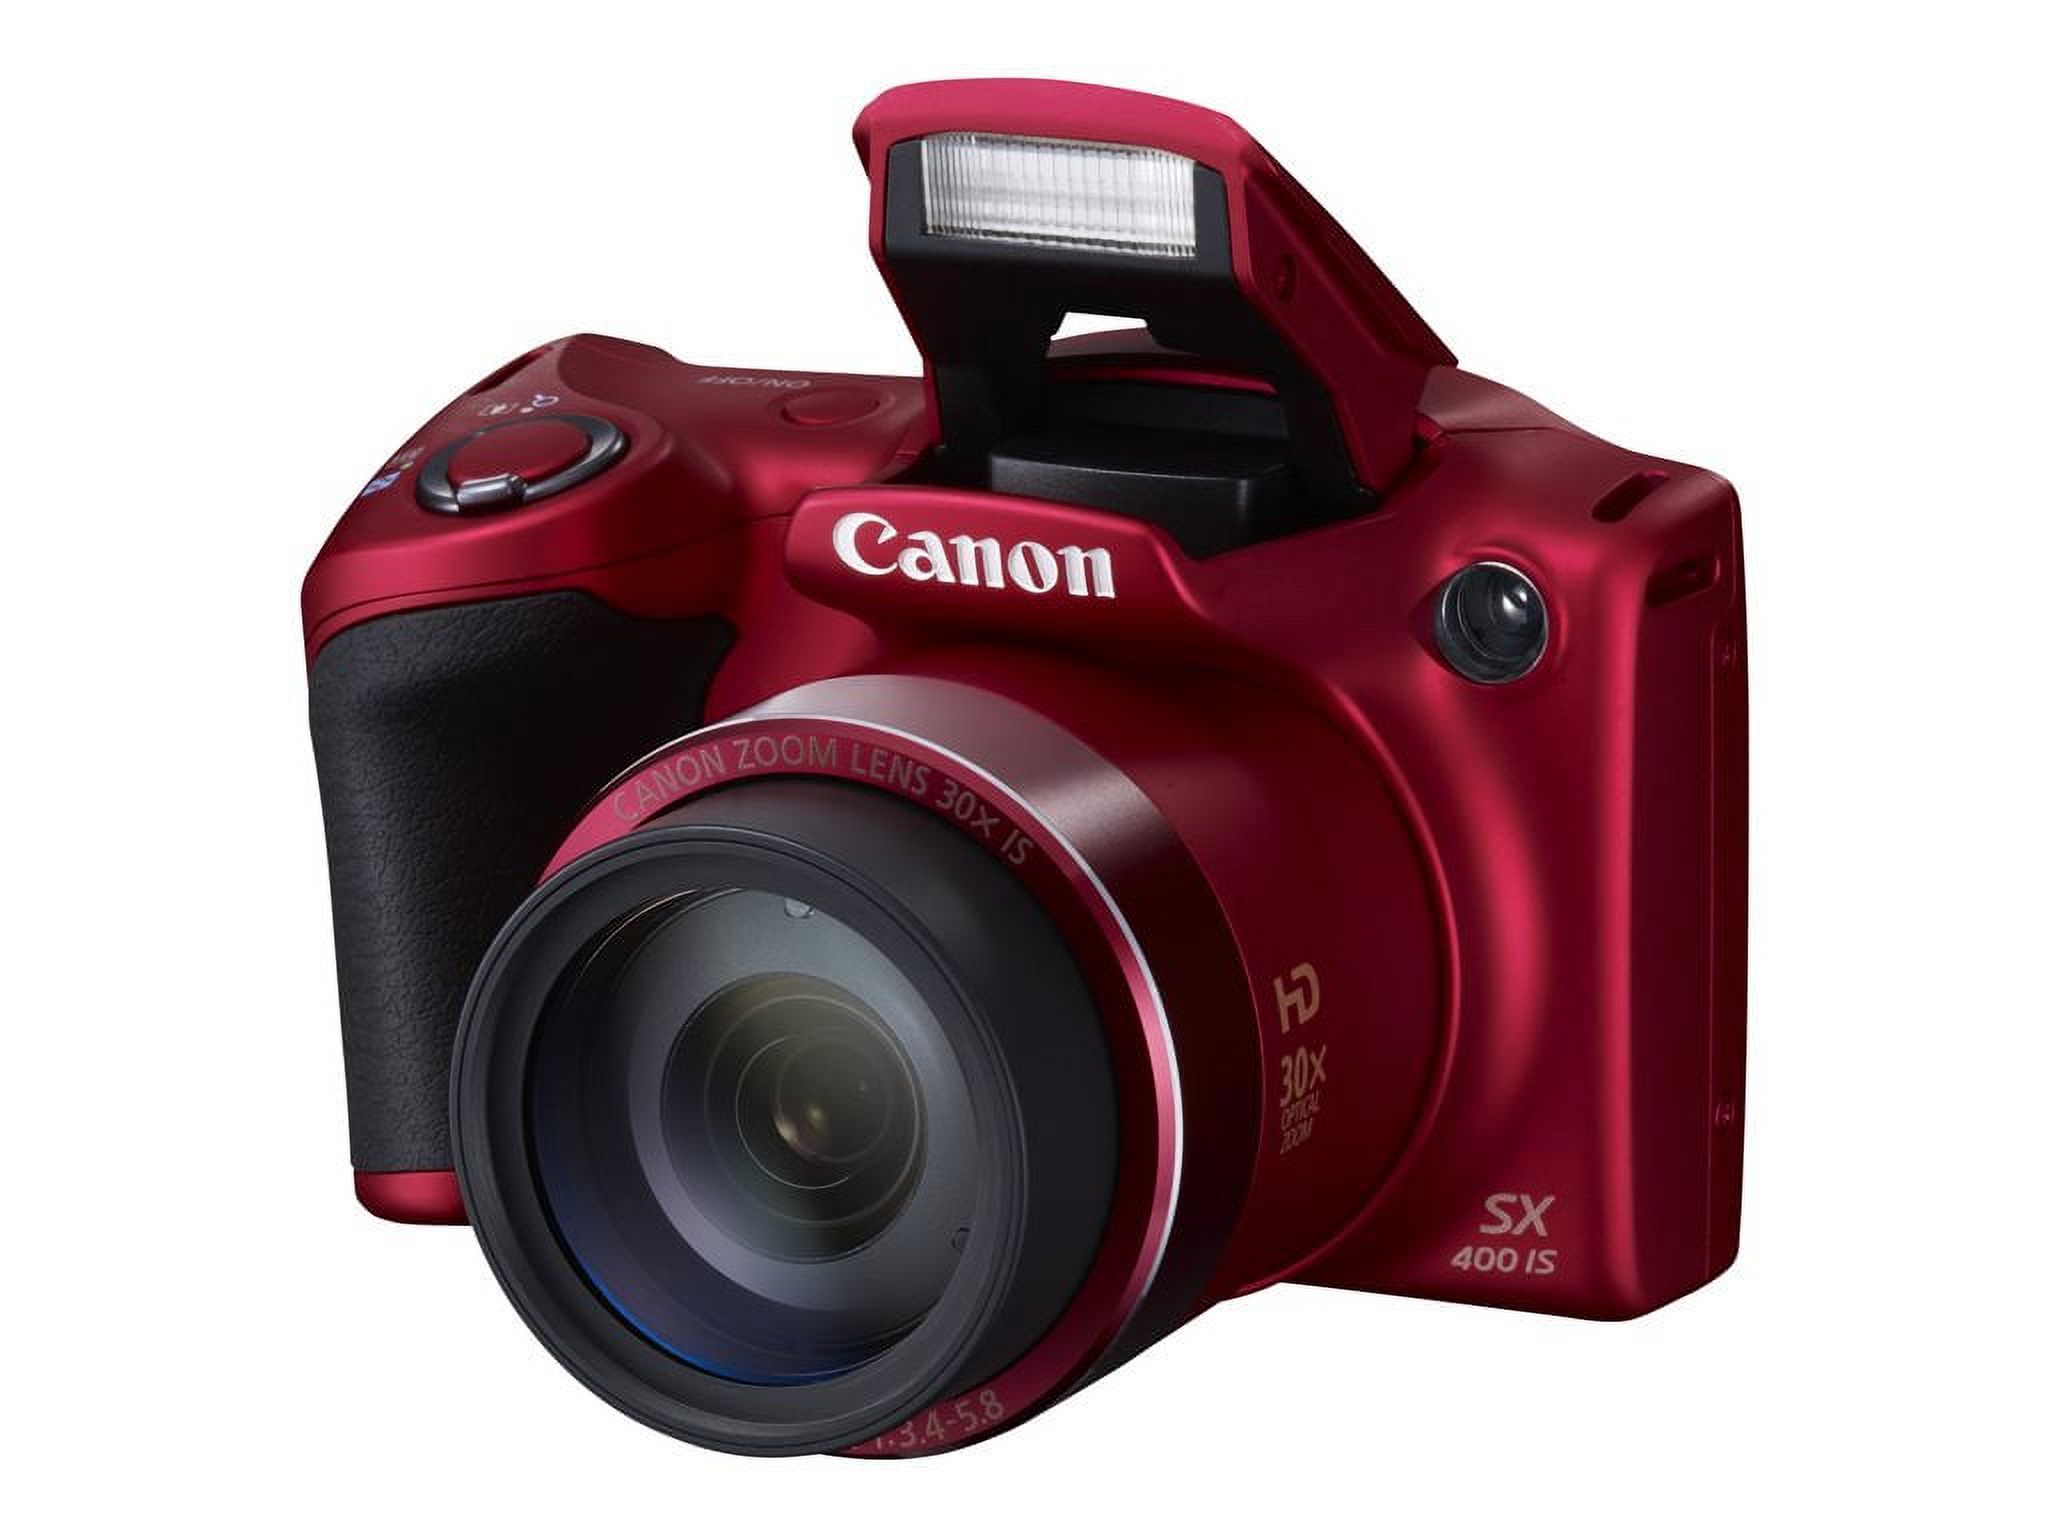 Canon PowerShot SX400 IS - Digital camera - High Definition - compact - 16.0 MP - 30 x optical zoom - red - image 1 of 72